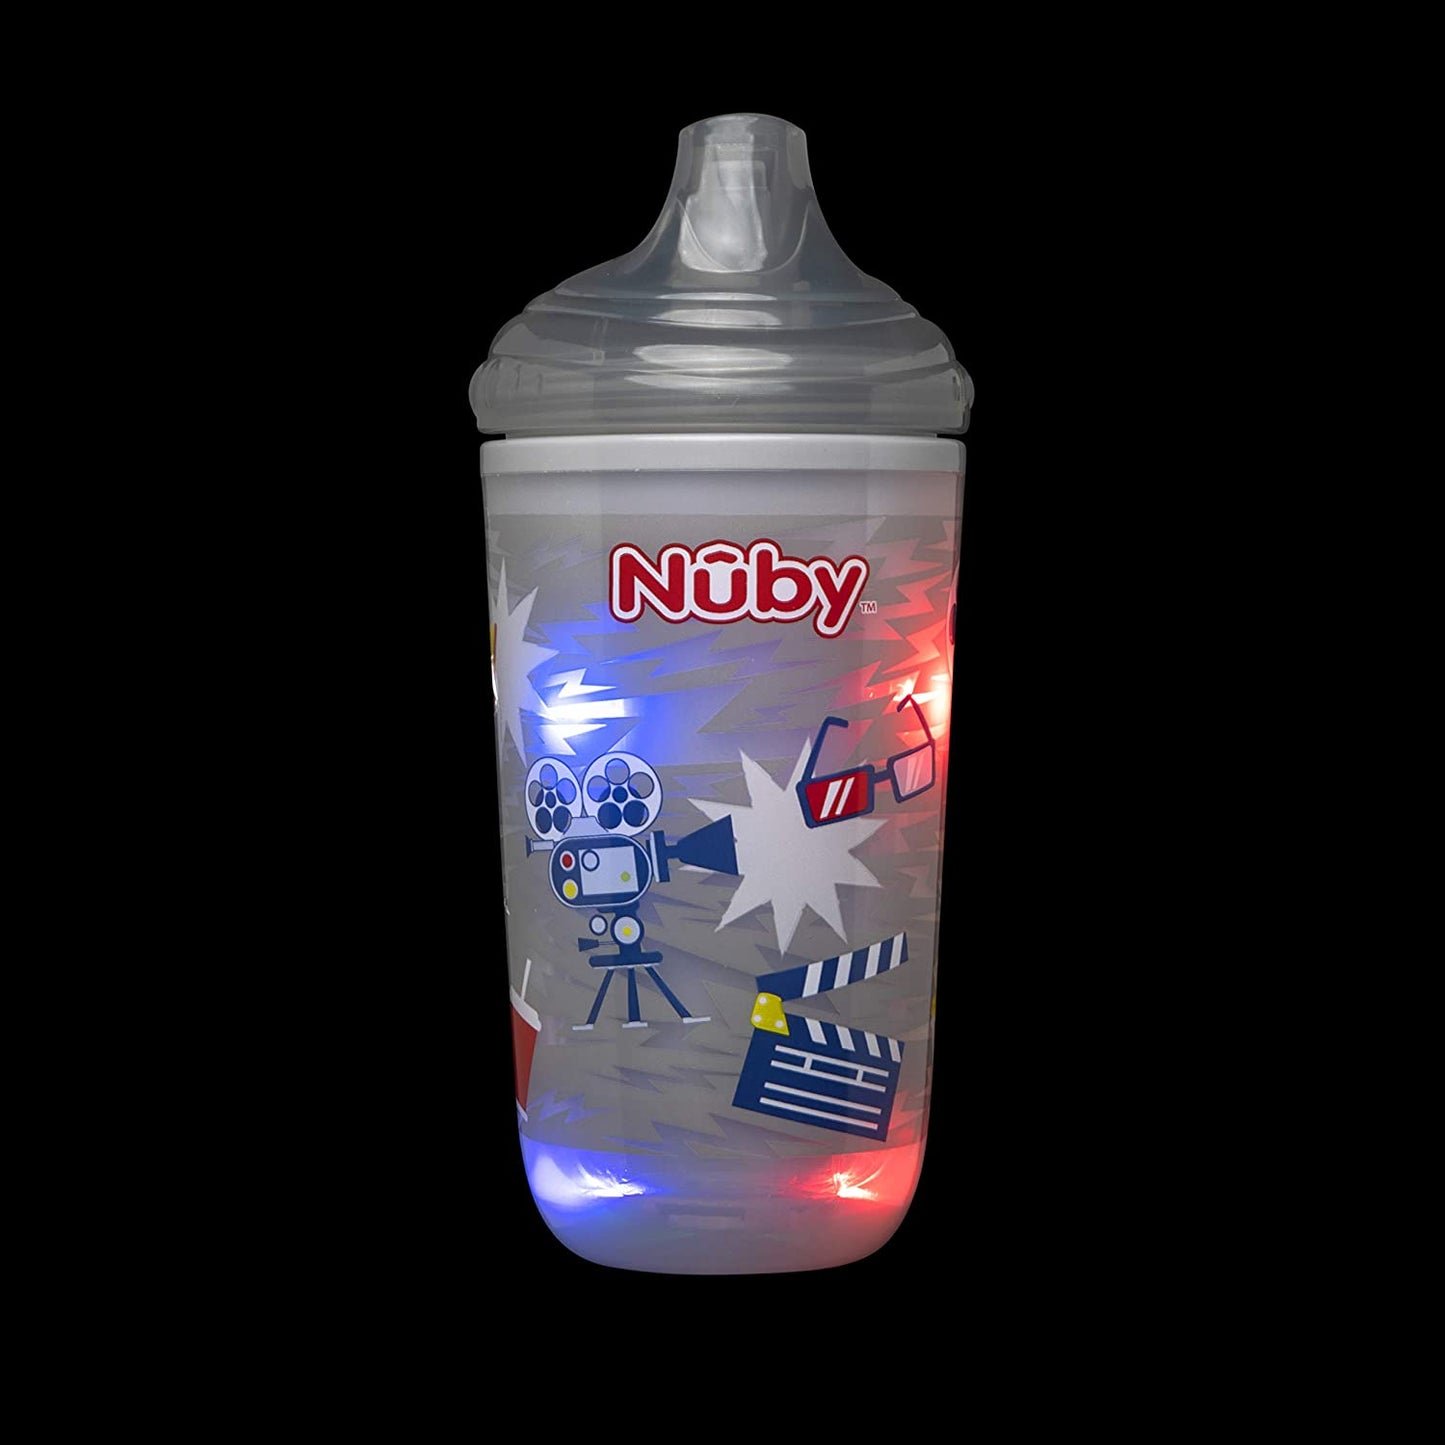 Nuby Insulated Light-Up Cup with No Spill Bite Resistant Hard Spout, 10 Oz